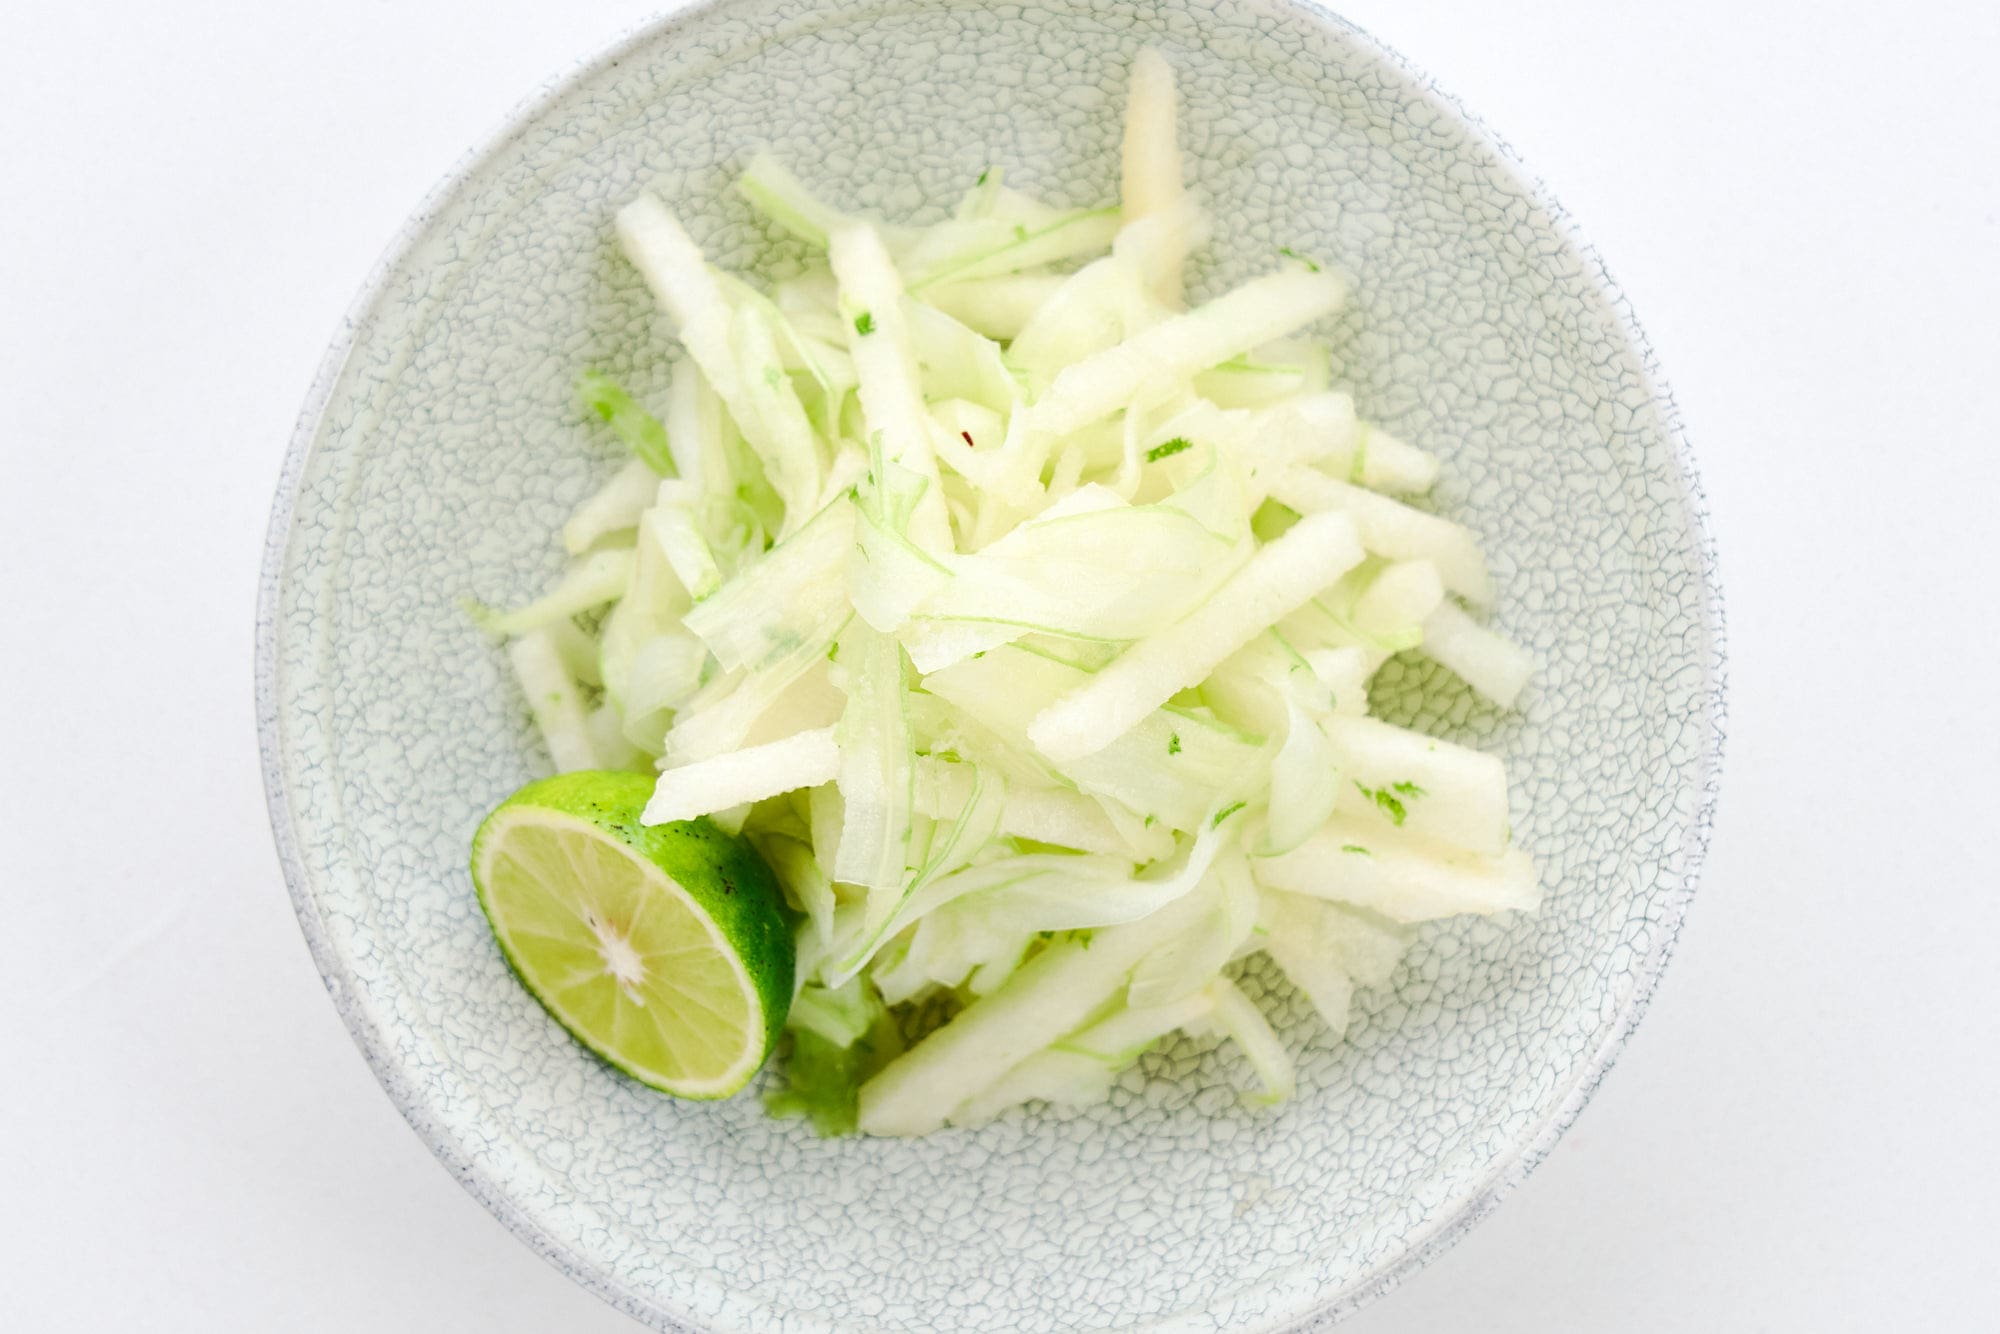 Crispy asian pear and crunchy salted celery give this refreshing autumn salad a delightful texture.